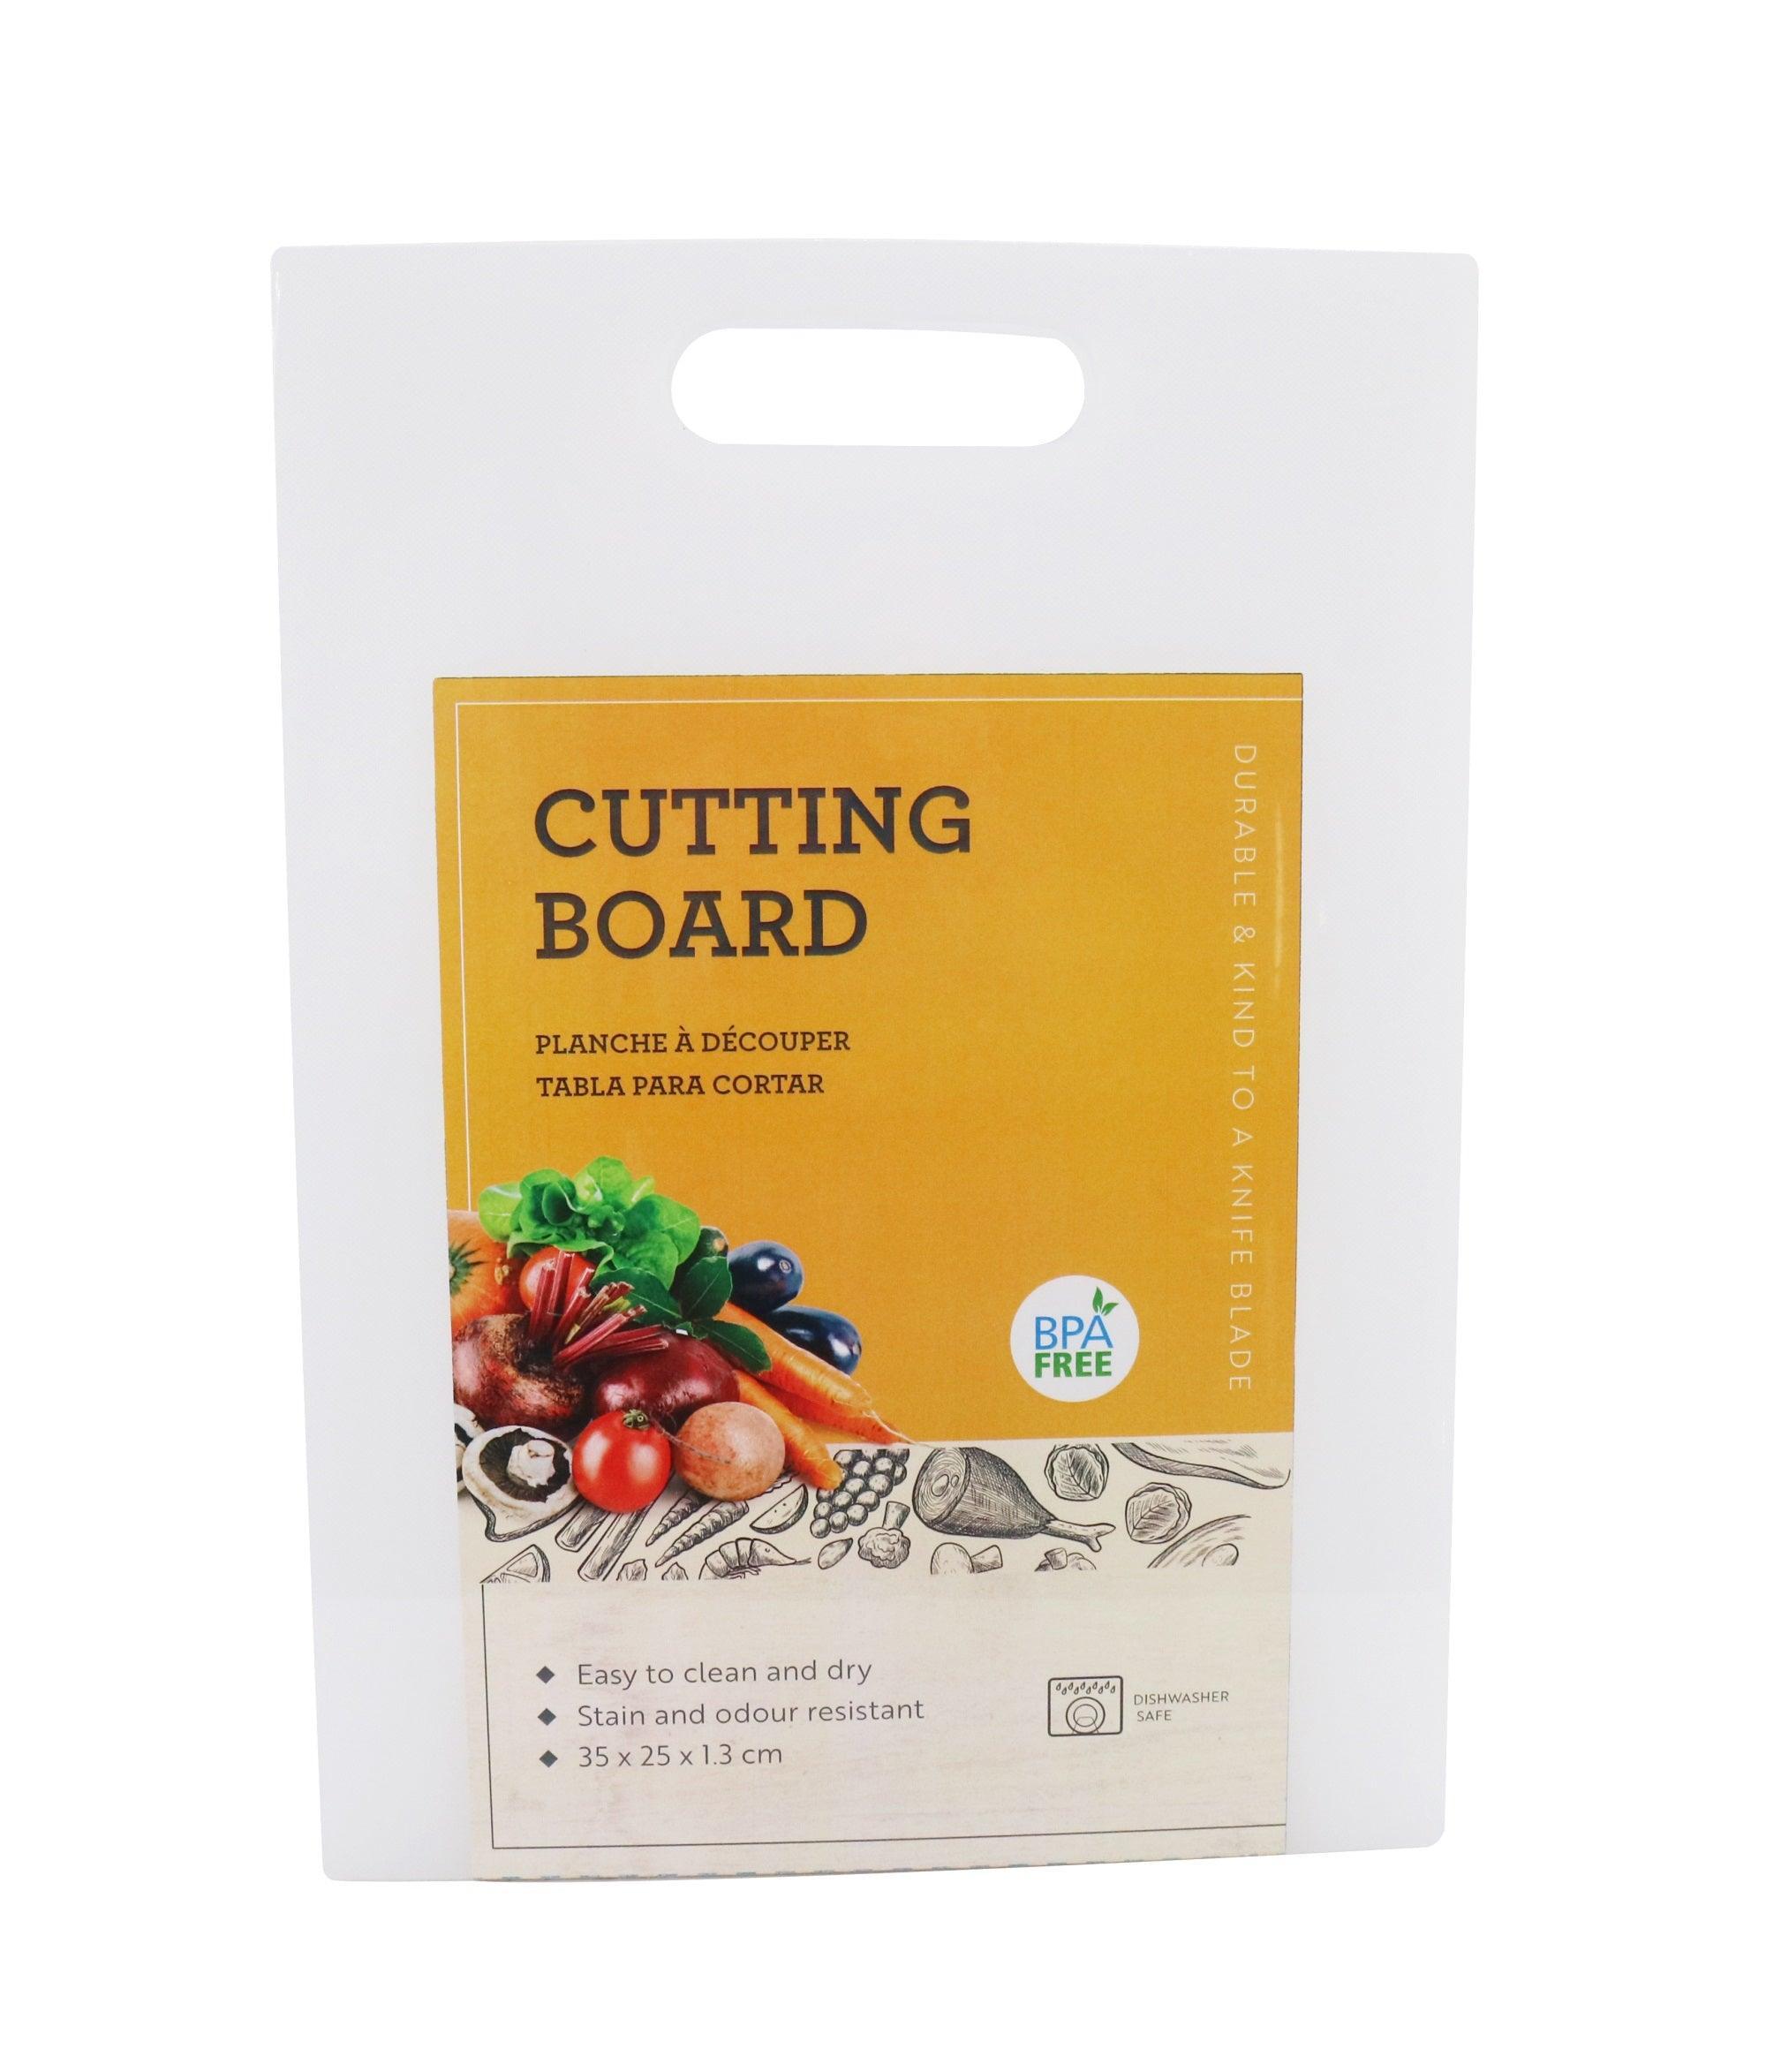 UBL Plastic Cutting Board 35 x 25 x 1.3cm - Choice Stores